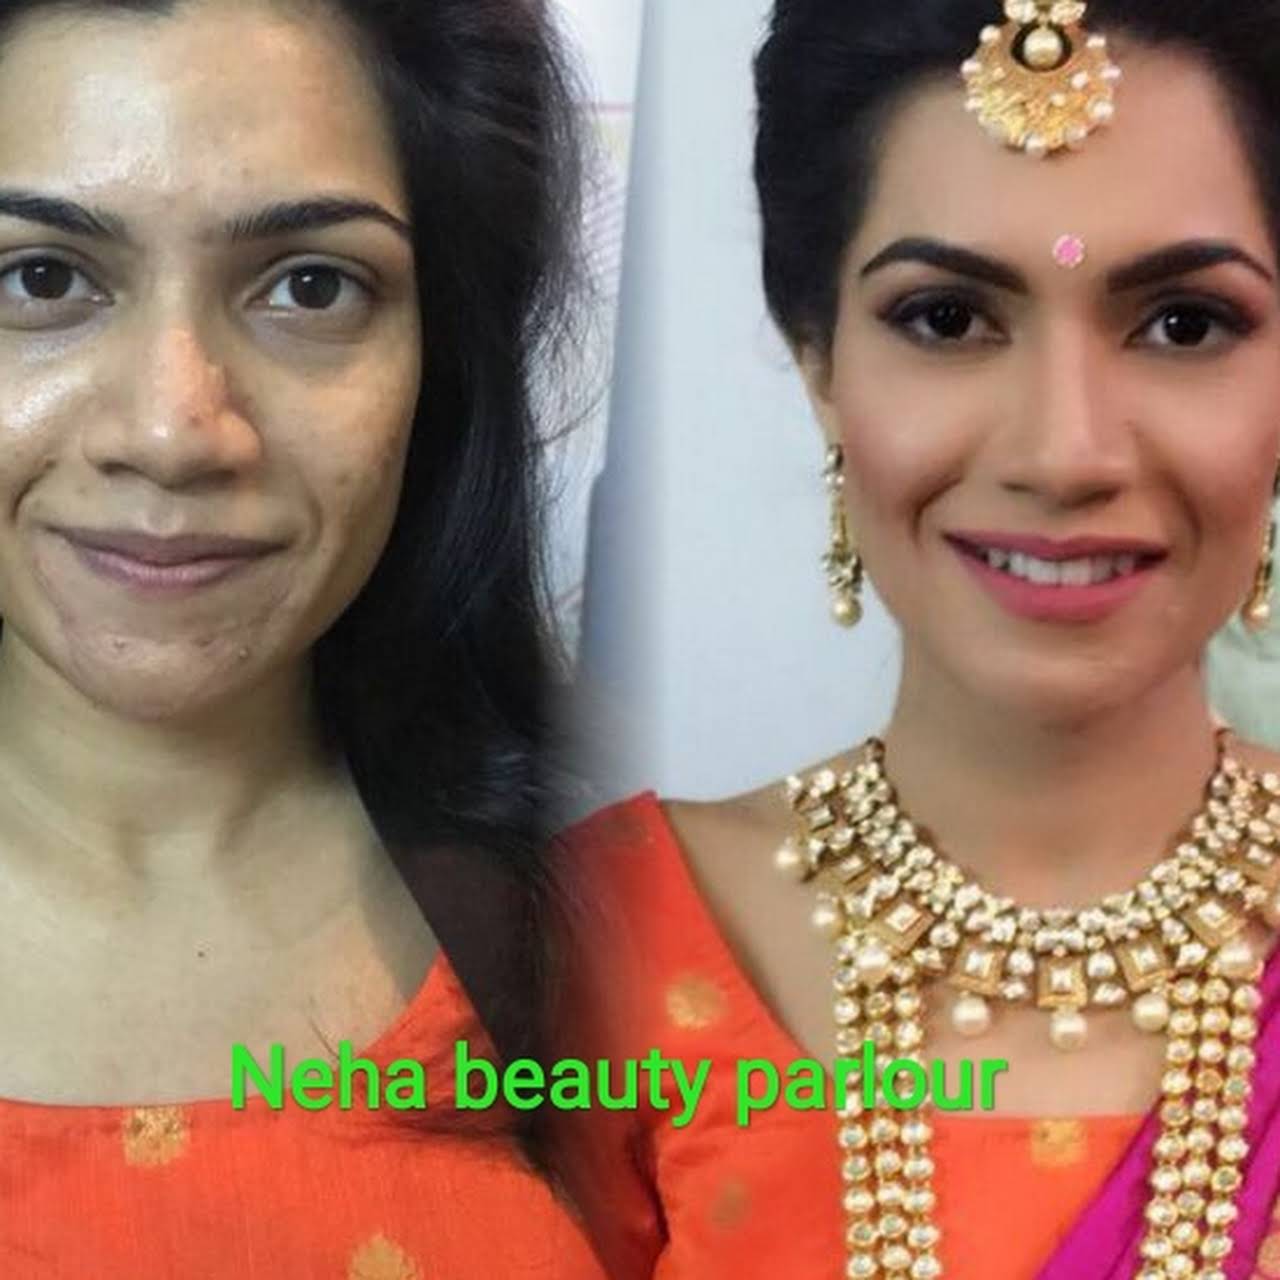 Neha Beauty Parlour( ALP'S SALON Bharti Taneja ) best makeup artist in bulandshahar –  Bridal makeup expert ( HD and Airbrush).we are no 1 beauty parlour in blundshahr since 1999 perfect place bringing your inner beauty out.